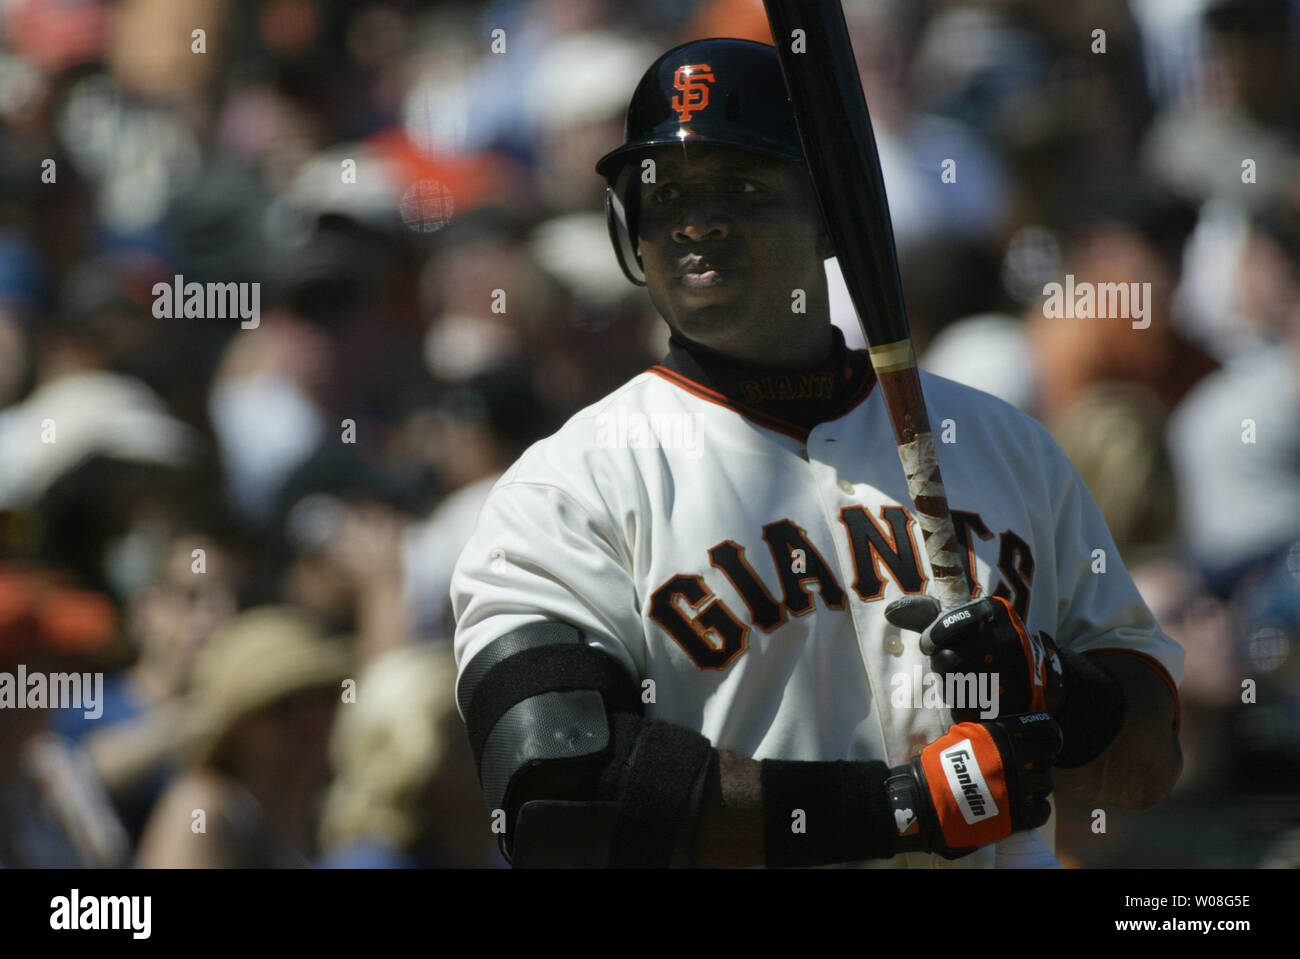 San Francisco Giants Barry Bonds waits to bat again after hitting career home run number 715 off the Colorado Rockies at AT&T Park in San Francisco on May 28, 2006. Bonds has passed Babe Ruth to be second only to Hank Aaron.  (UPI Photo/Bruce Gordon) Stock Photo